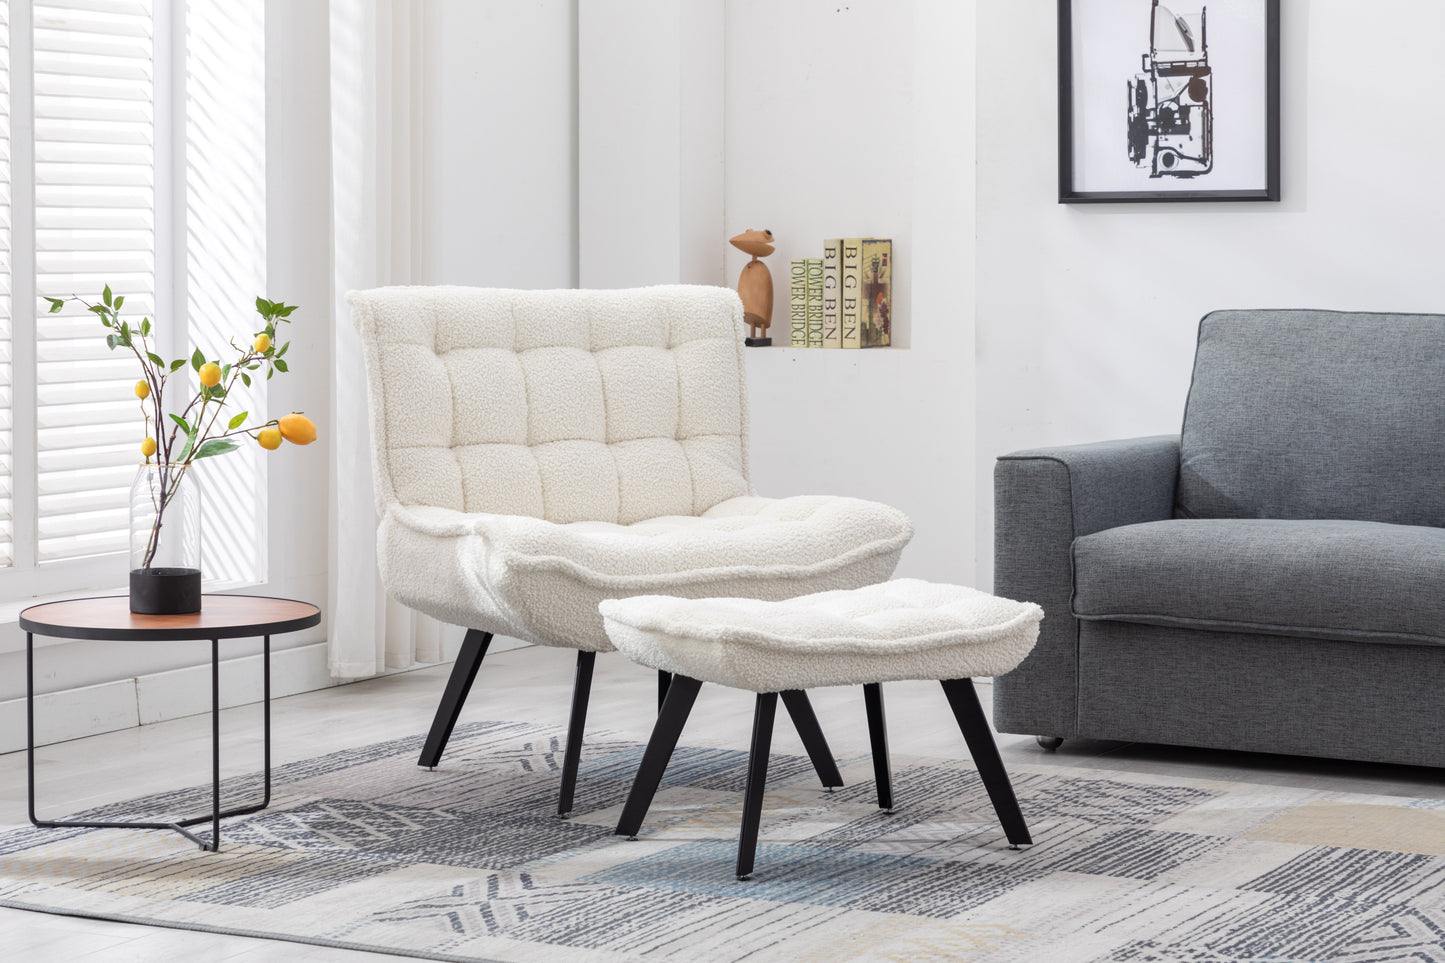 Plush White Teddy-Soft Fabric Material, Large Width Tufted Accent Chair With Ottoman, Black Legs White